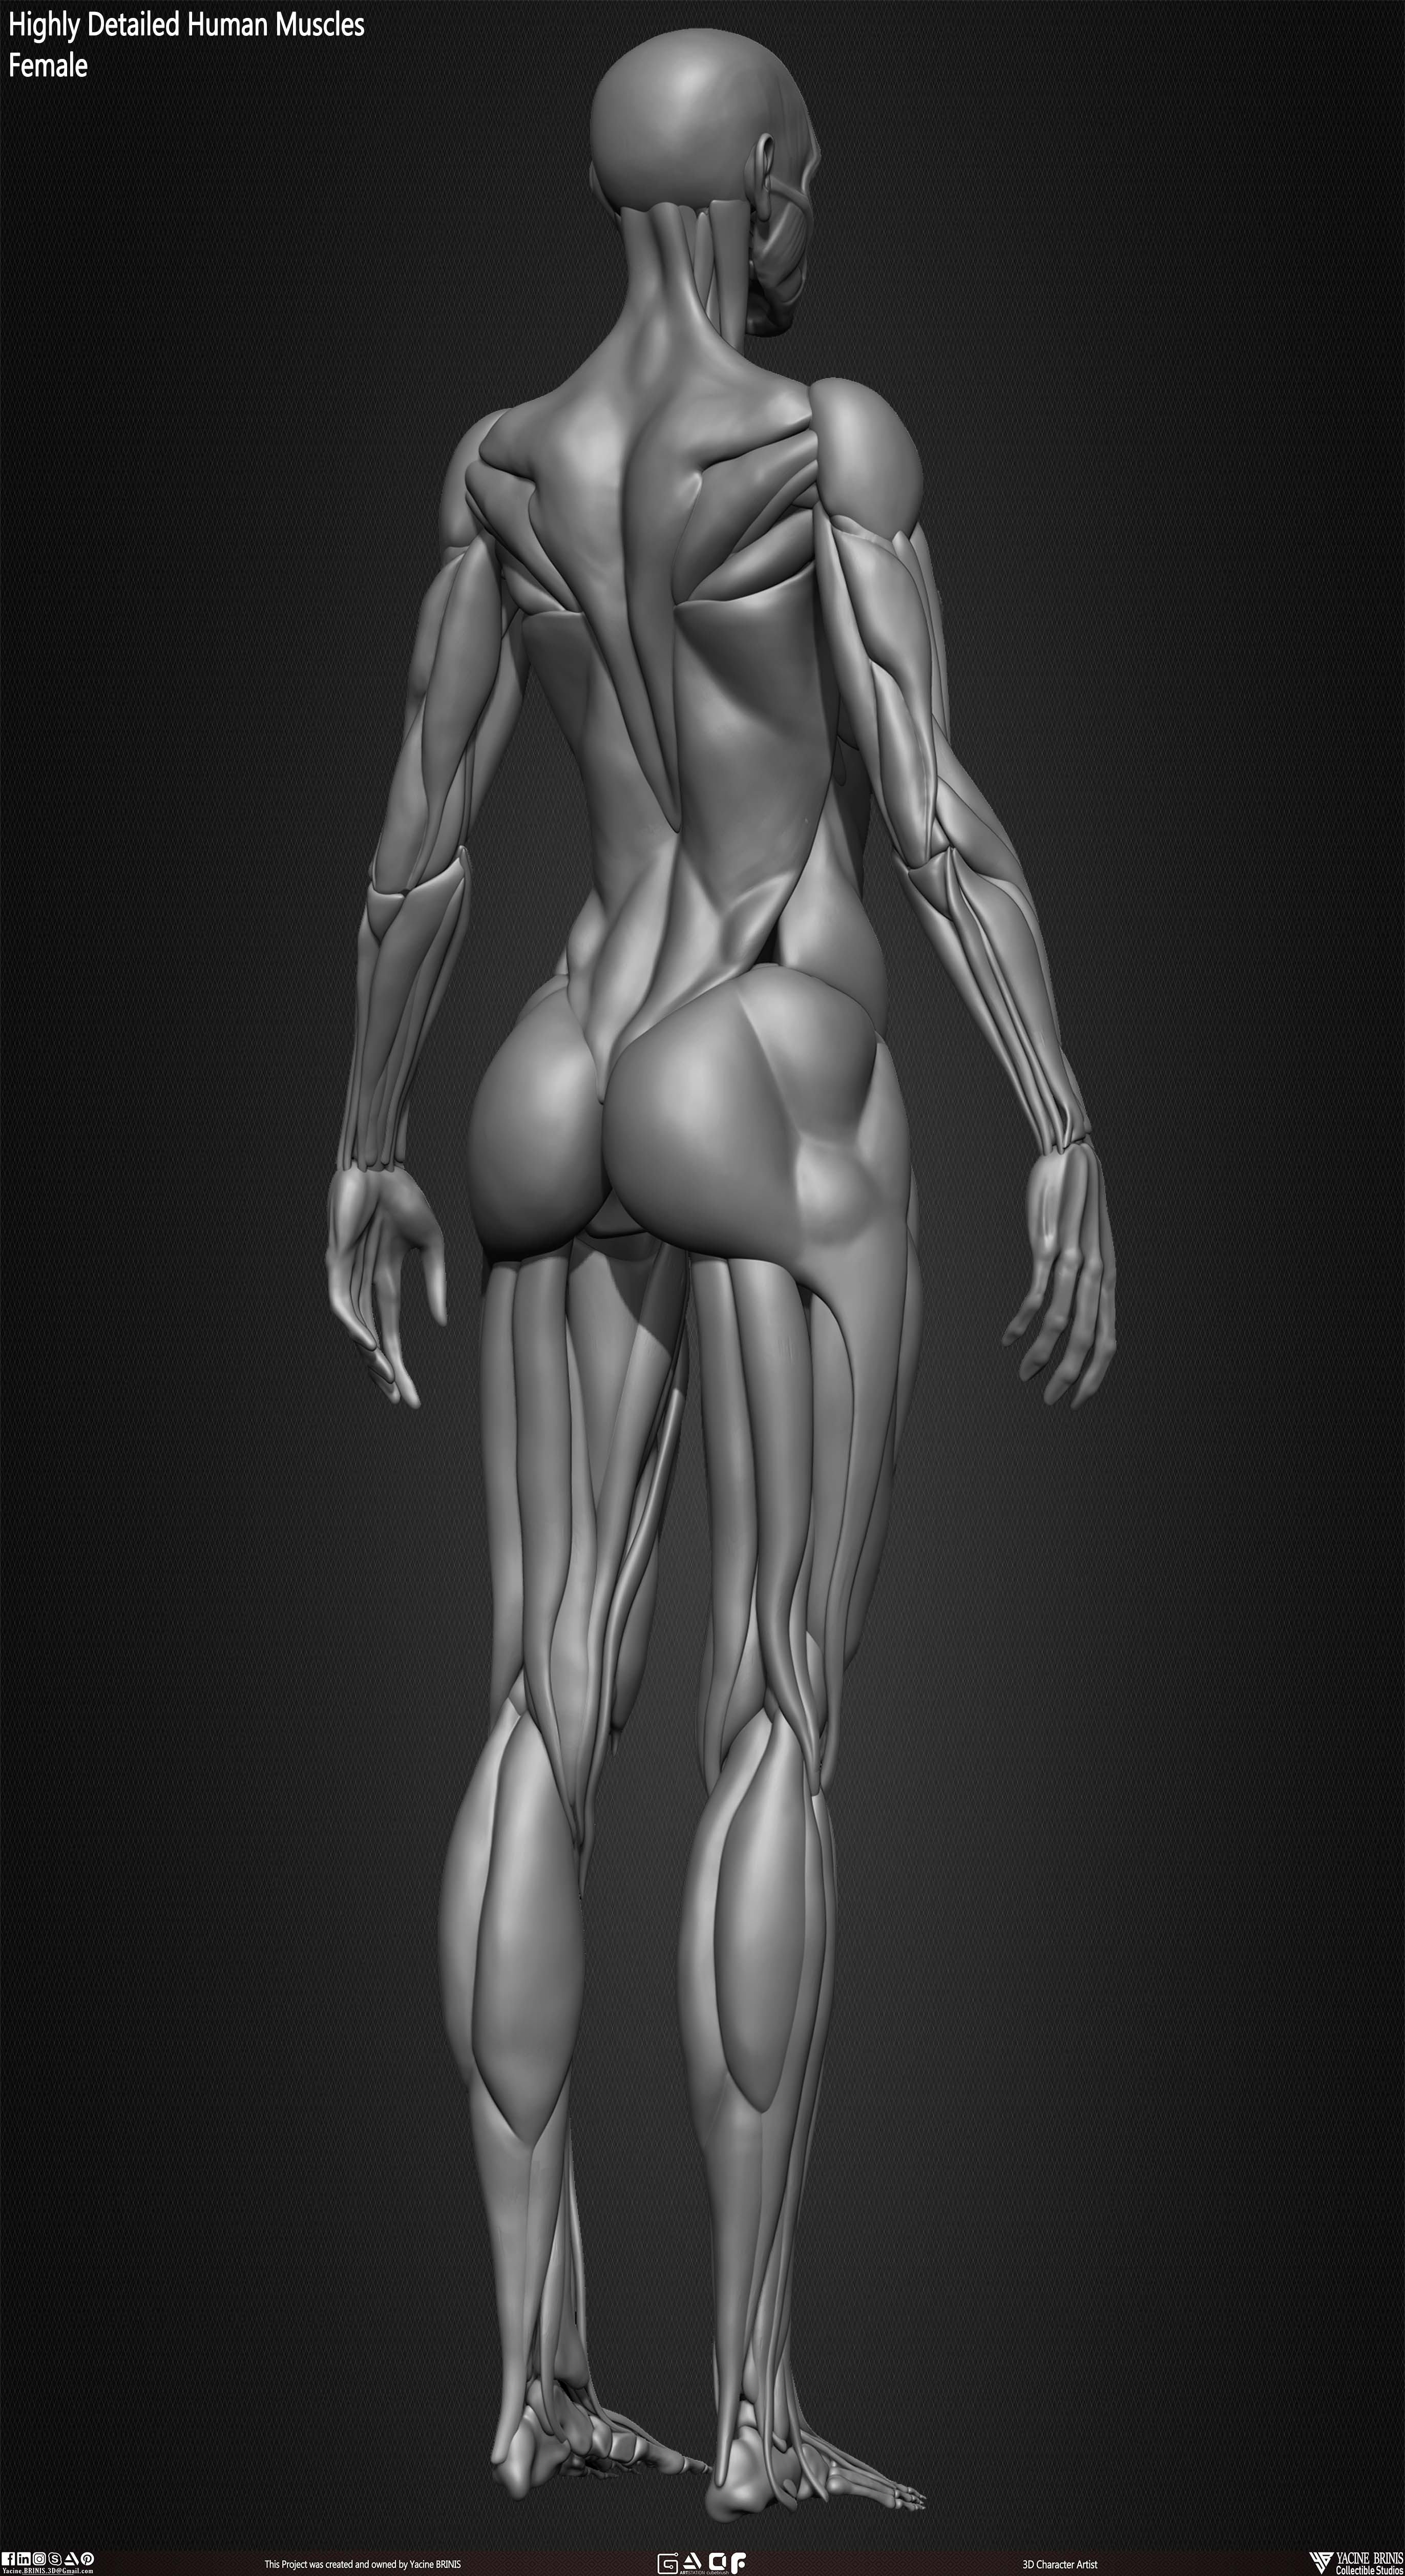 Female Human Muscles 3D Model sculpted by Yacine BRINIS 019